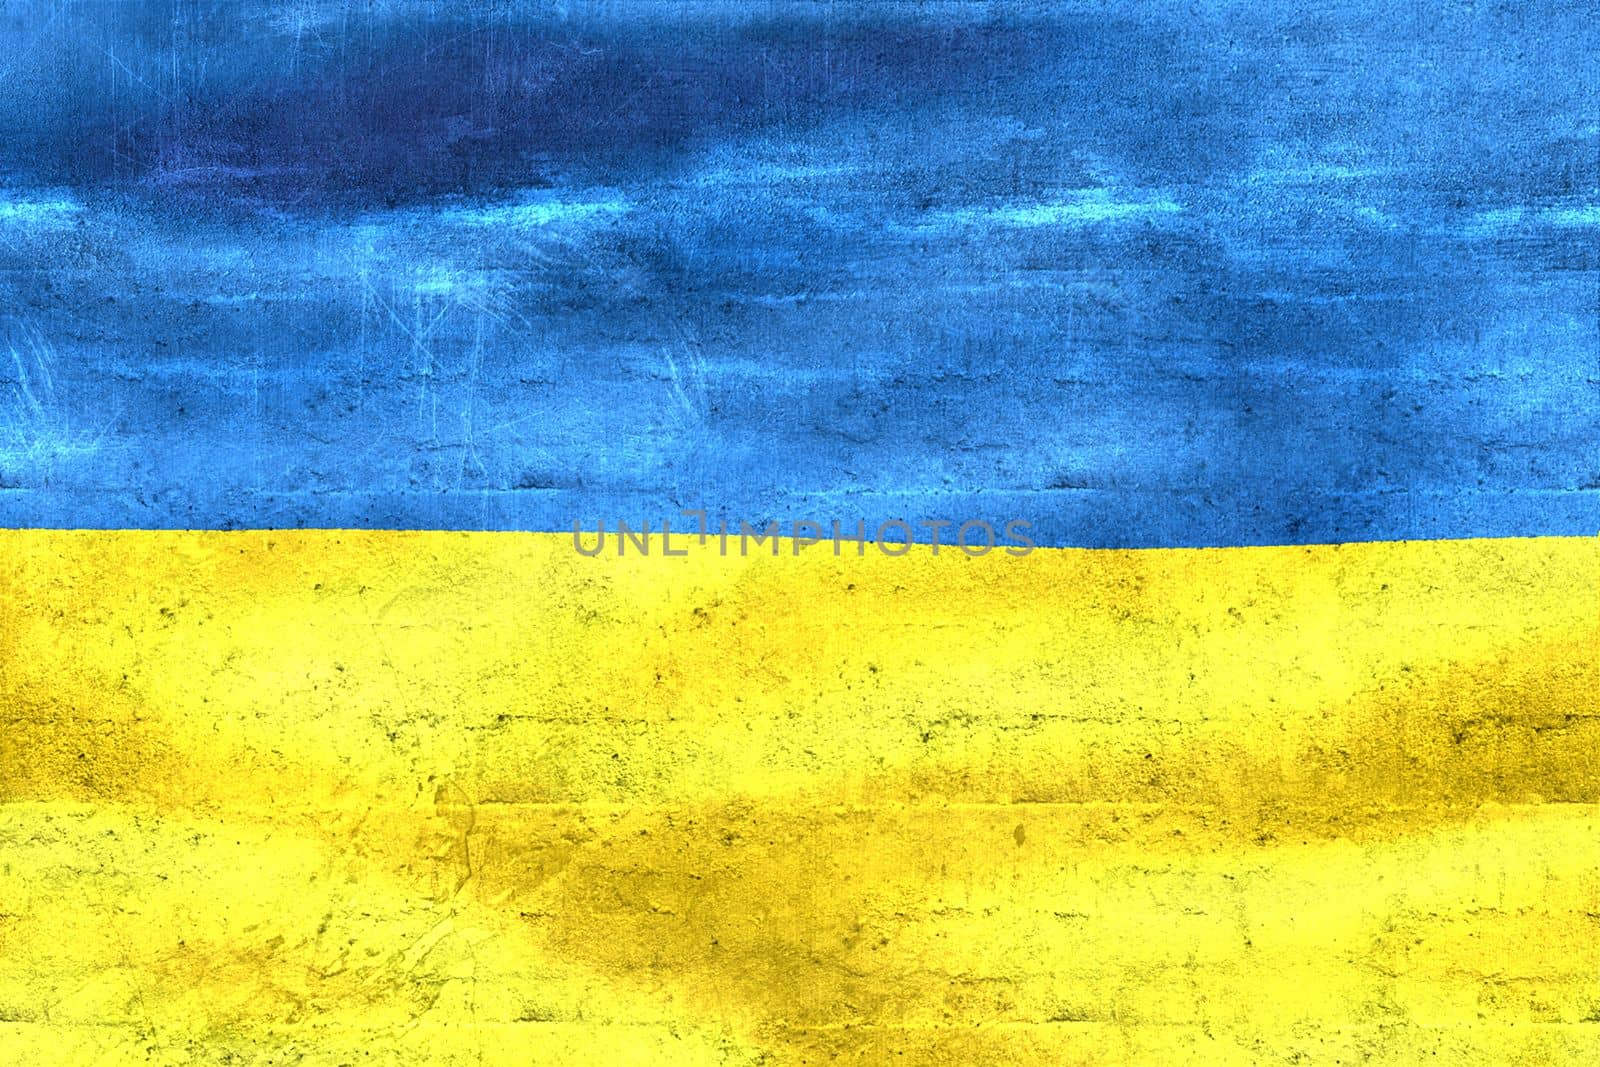 3D-Illustration of a Ukraine flag - realistic waving fabric flag by MP_foto71